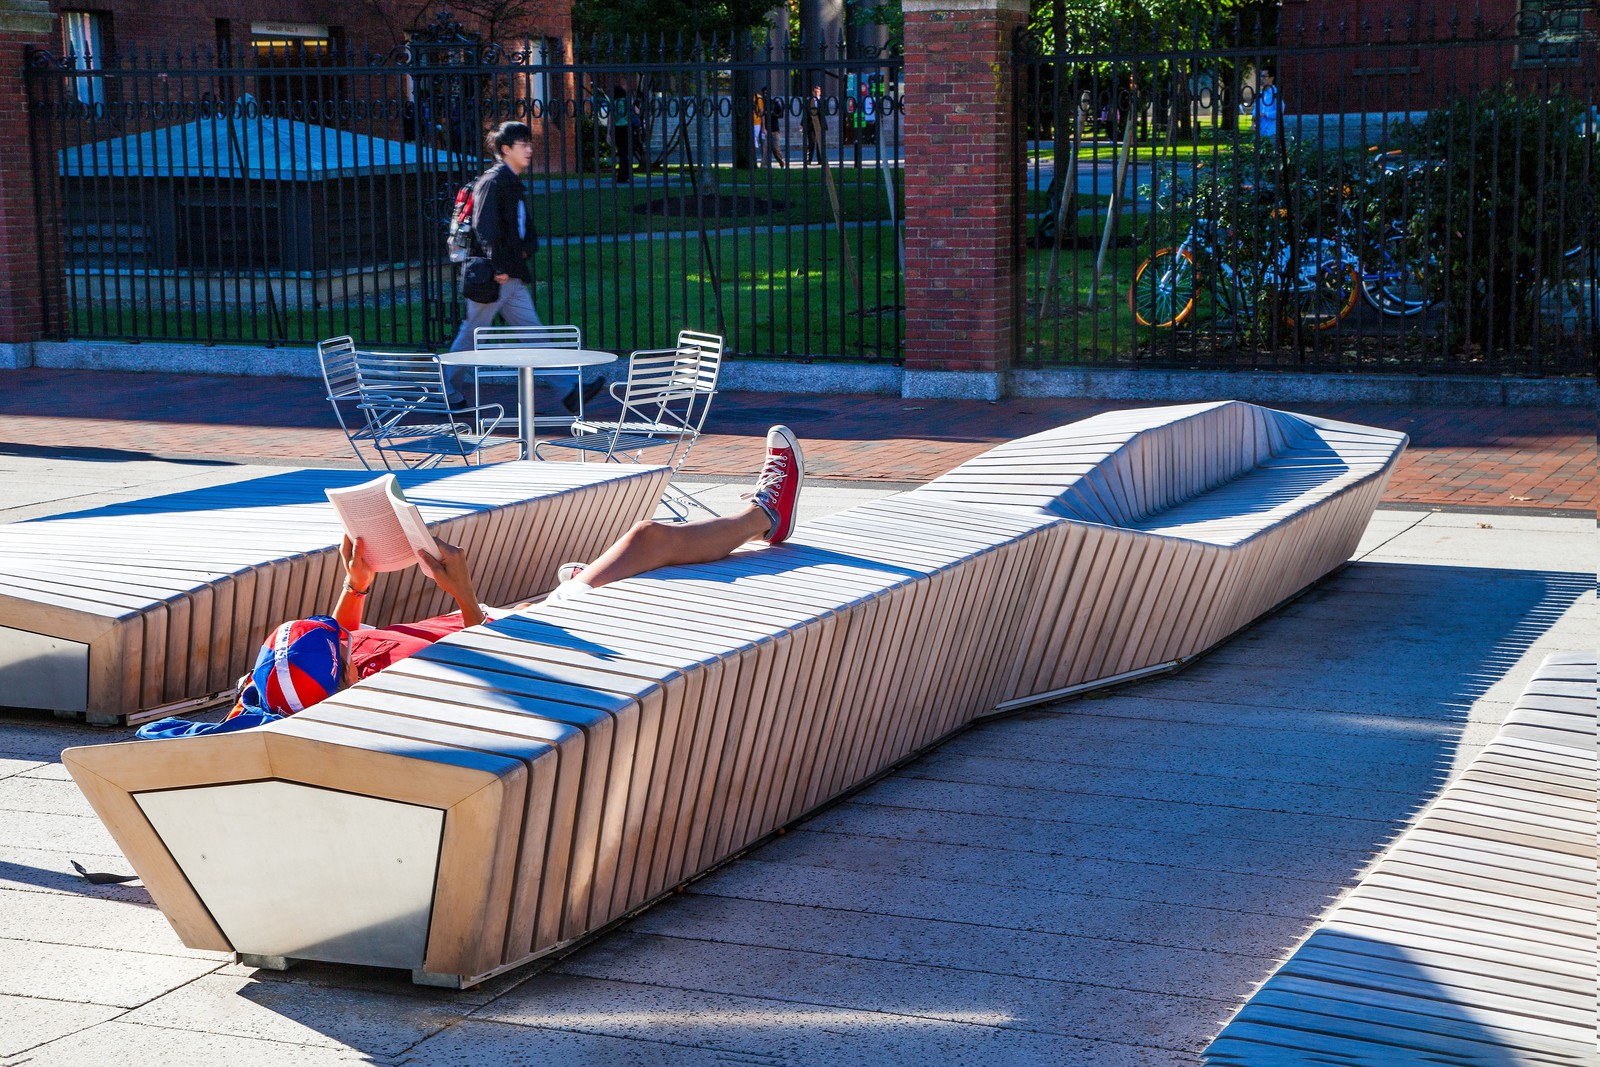 Relaxing on these beautifully crafted Harvard University benches. The wood makes them comfortable and the unique design make these benches the centerpiece of Harvard University Plaza.